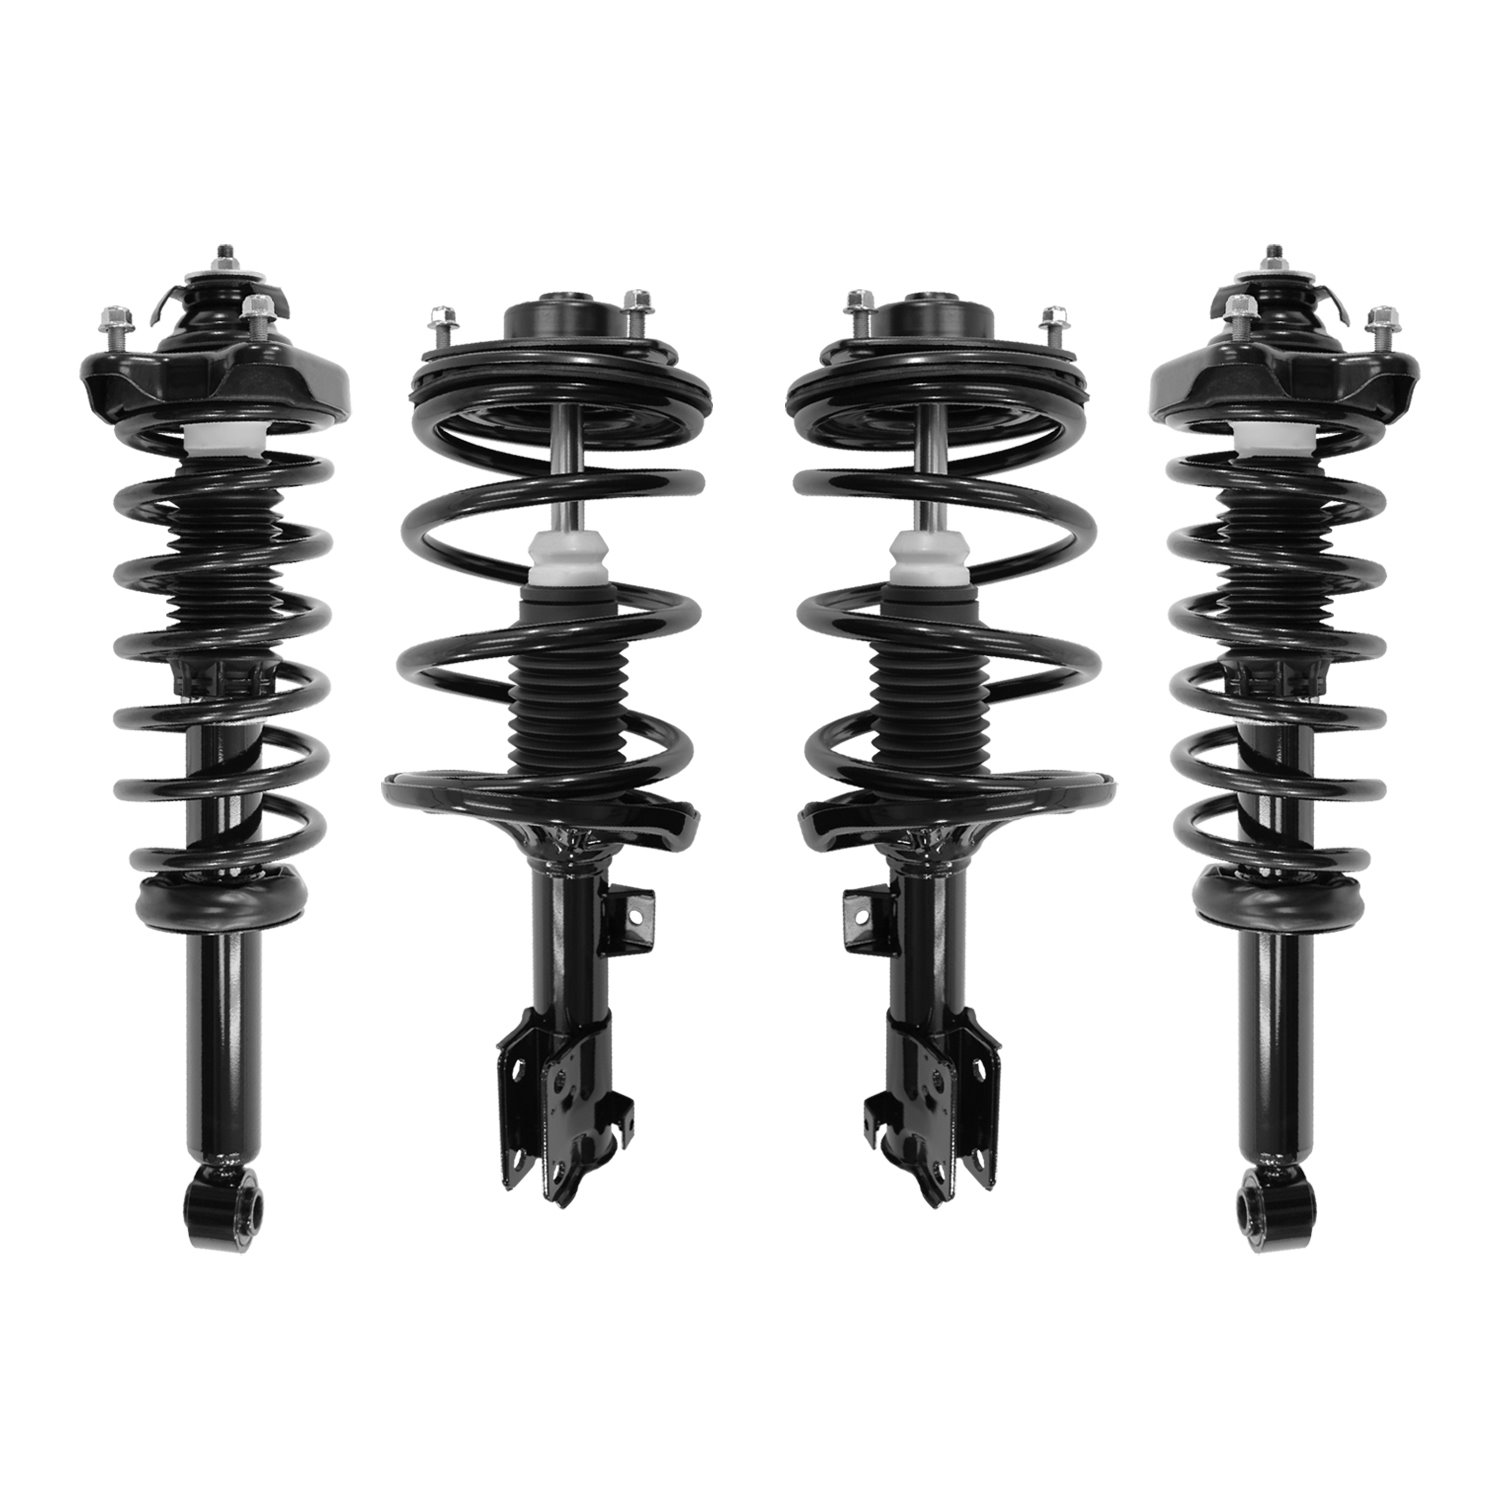 4-13045-16060-001 Front & Rear Suspension Strut & Coil Spring Assembly Kit Fits Select Mitsubishi Galant